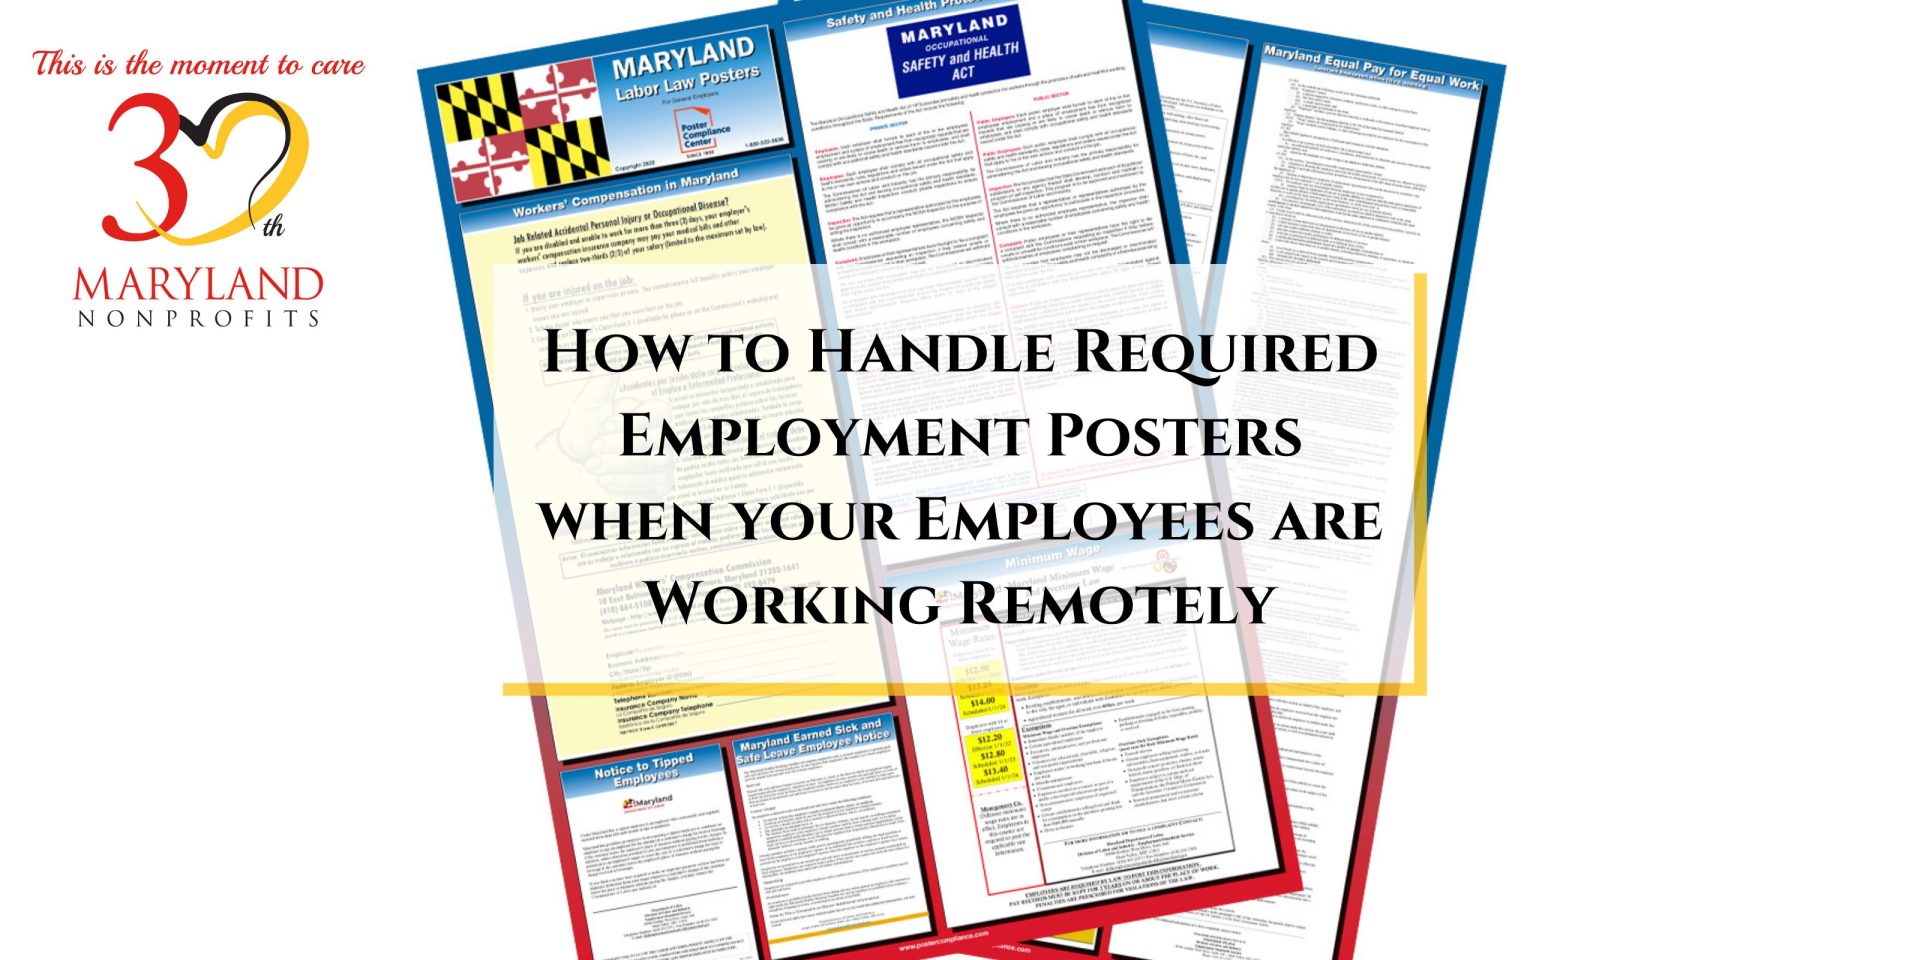 How to handle required employment posters when. your employees are working remotely